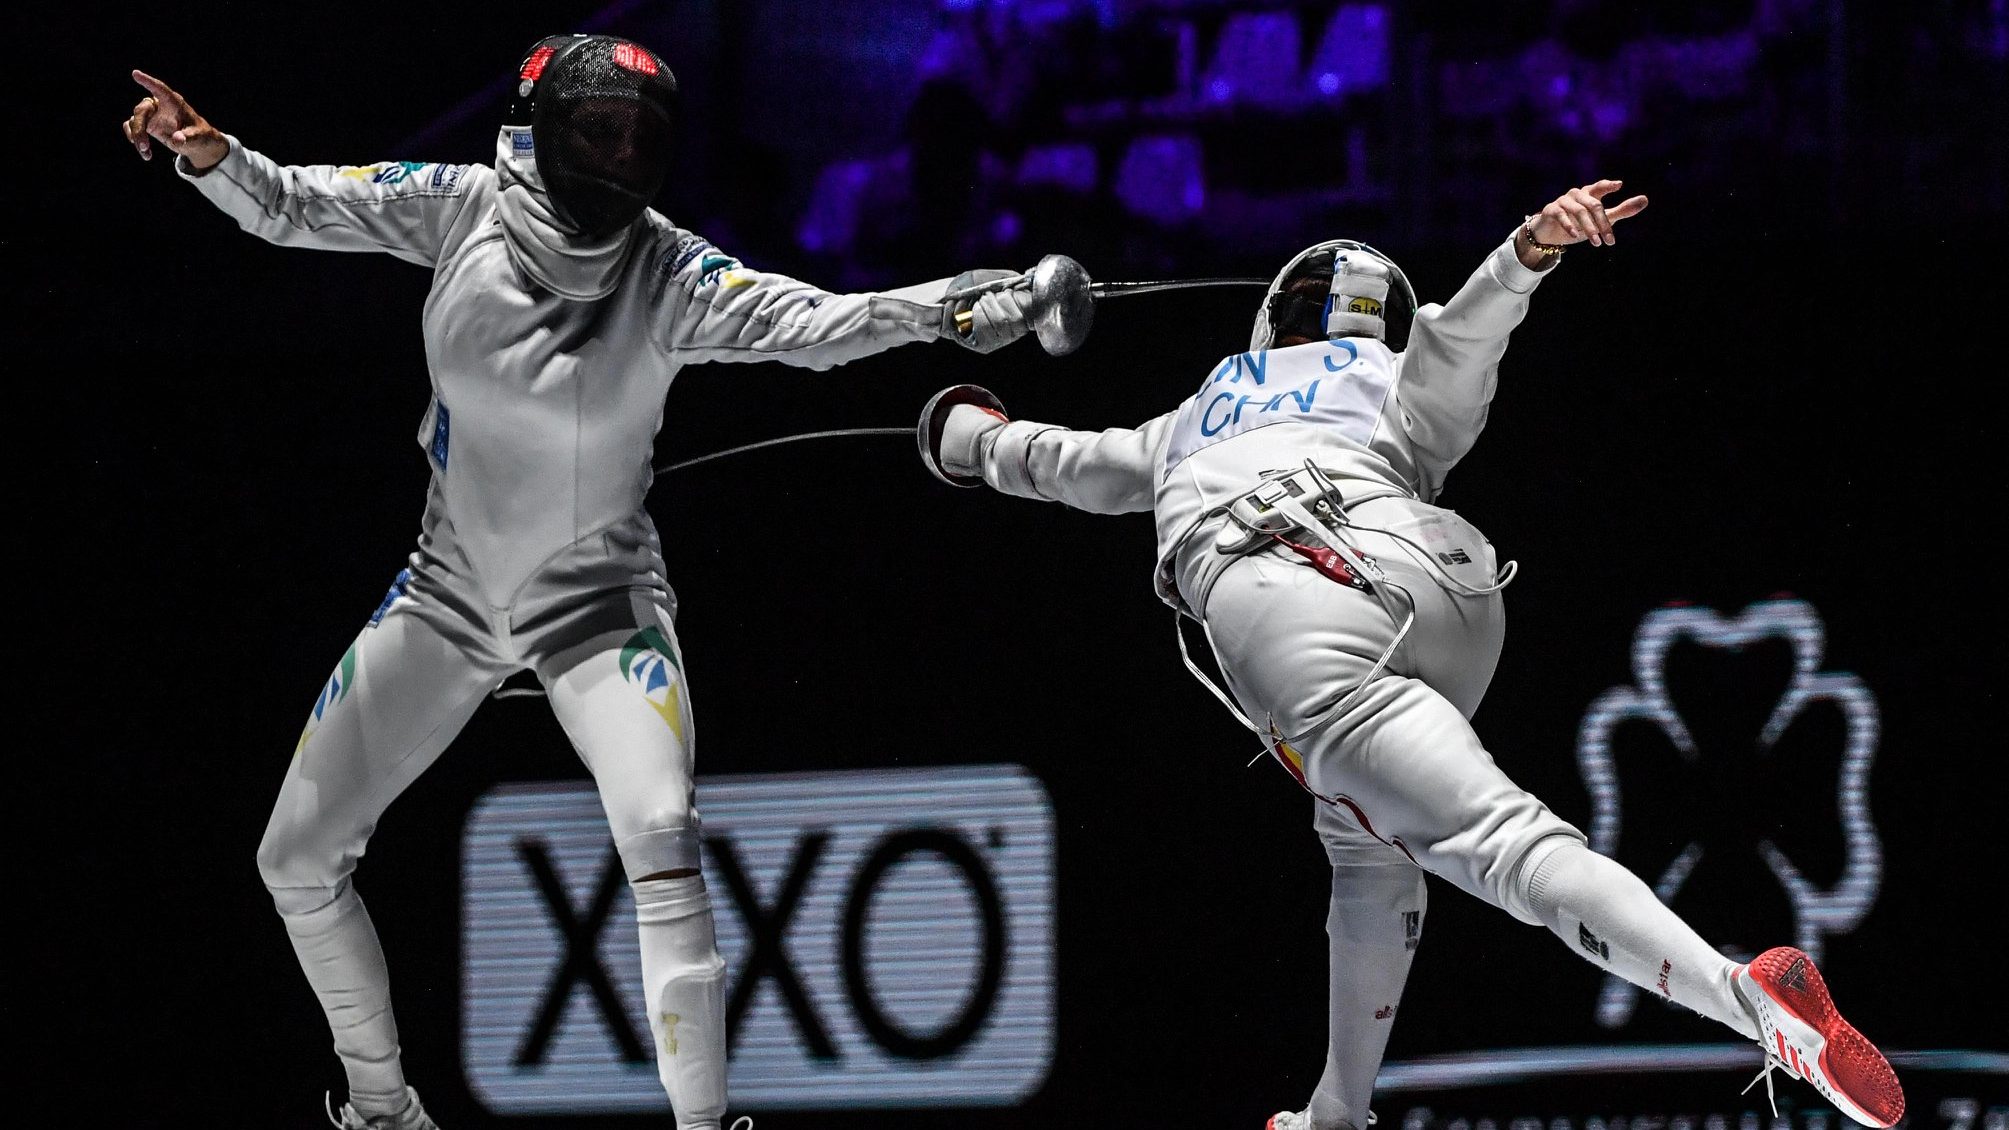 Moellhausen wins in overtime to Brazil’s first World Fencing